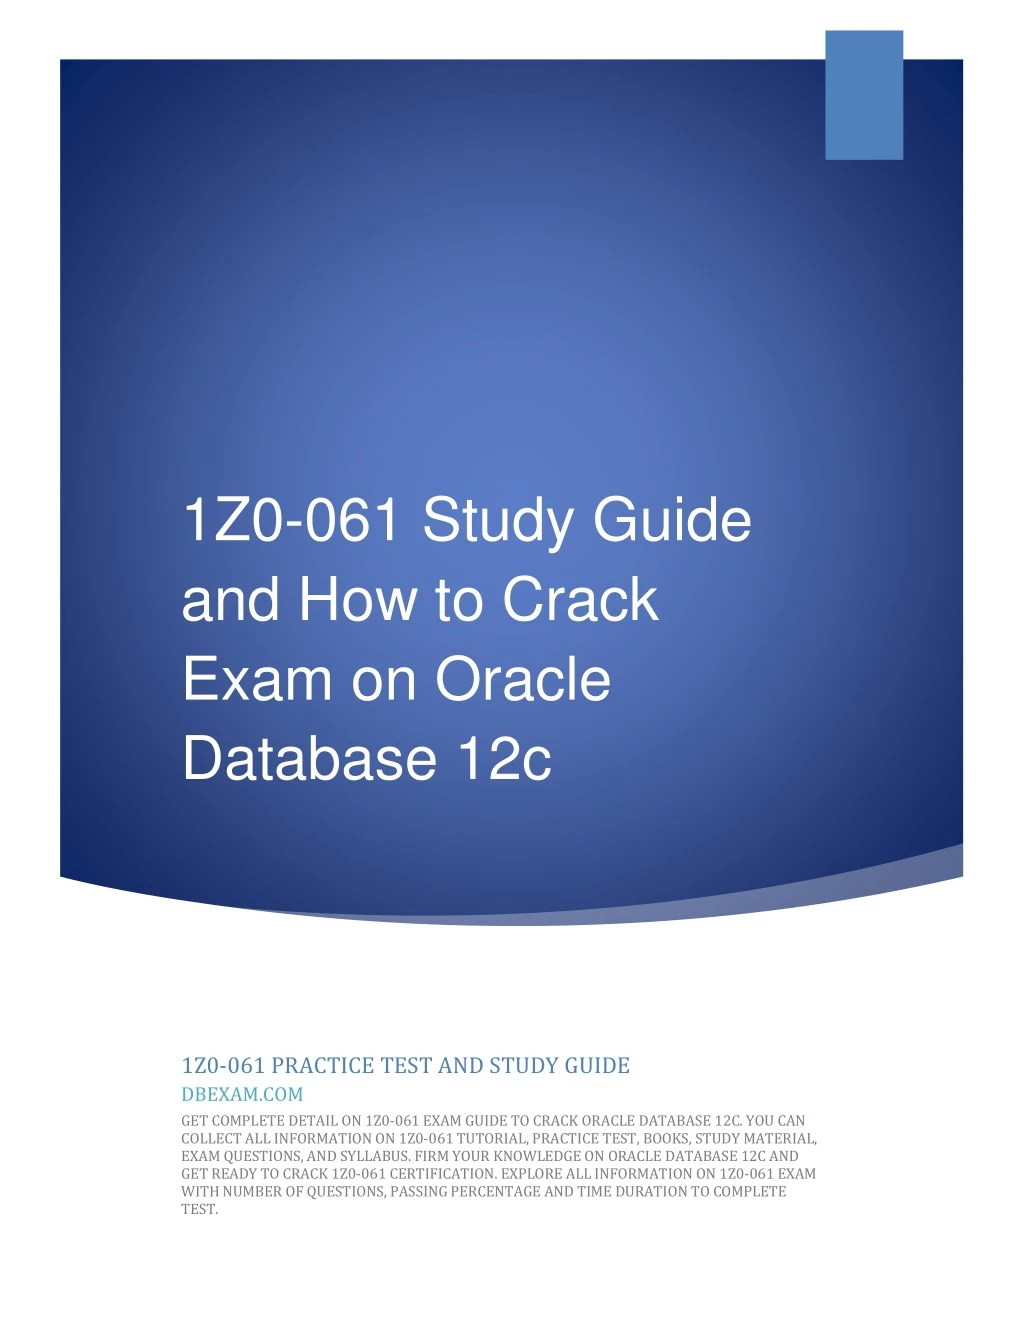 1z0 061 study guide and how to crack exam